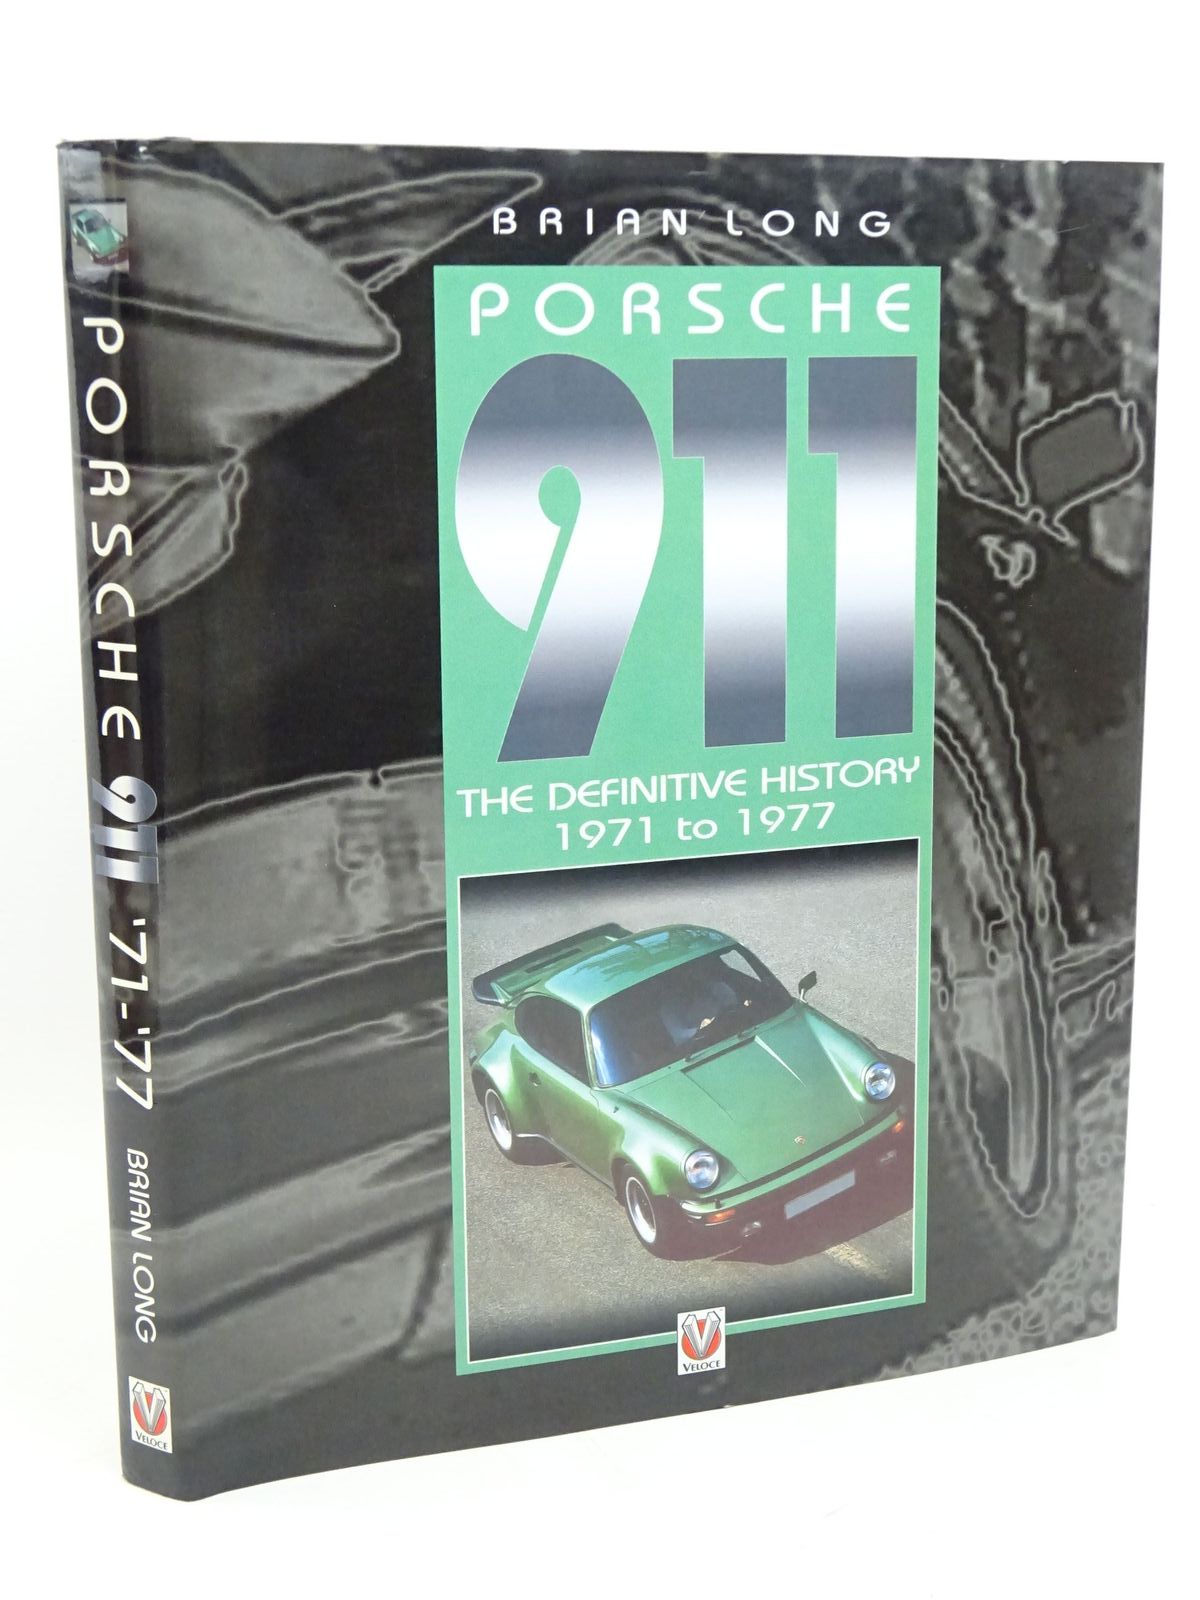 Porsche 911 The Definitive History 1971 To 1977